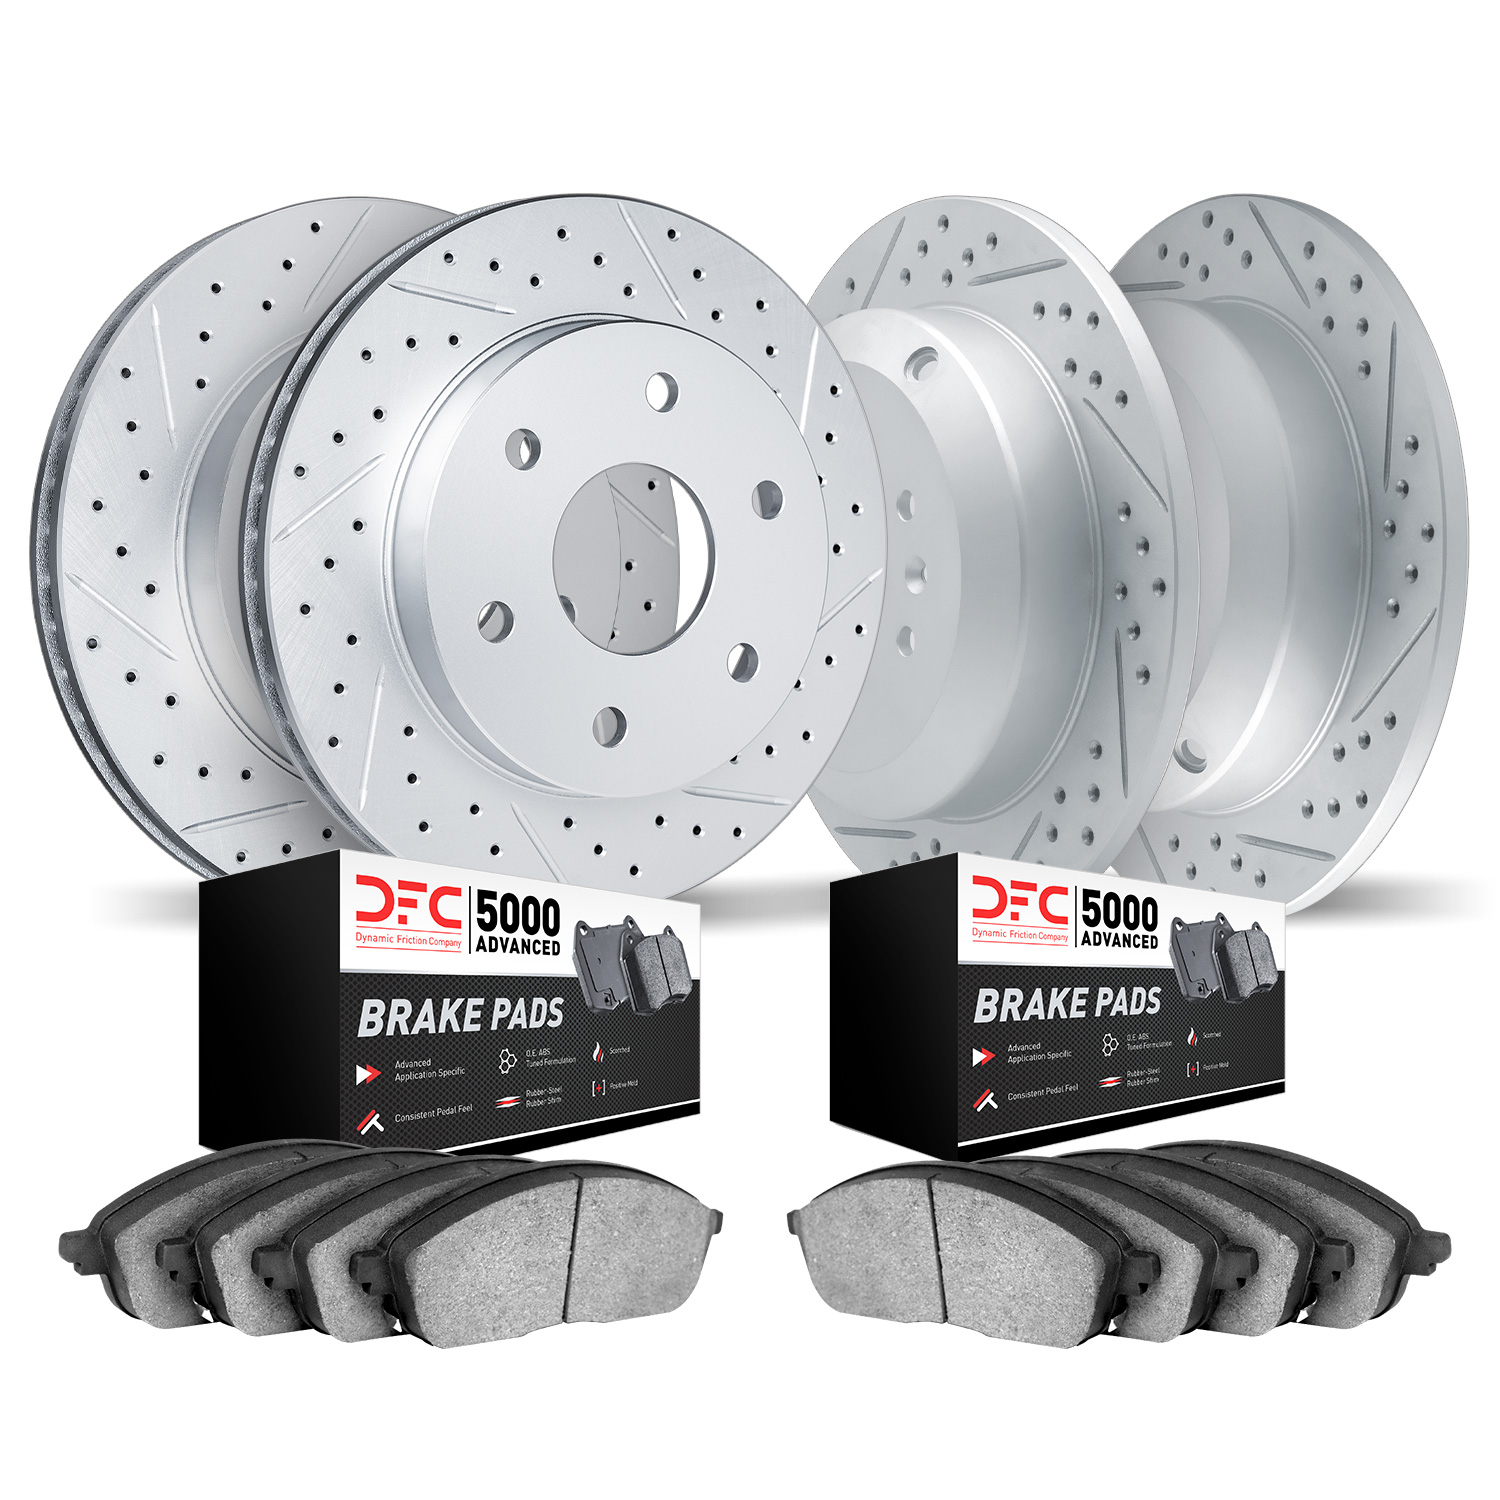 2504-40097 Geoperformance Drilled/Slotted Rotors w/5000 Advanced Brake Pads Kit, 2003-2004 Mopar, Position: Front and Rear